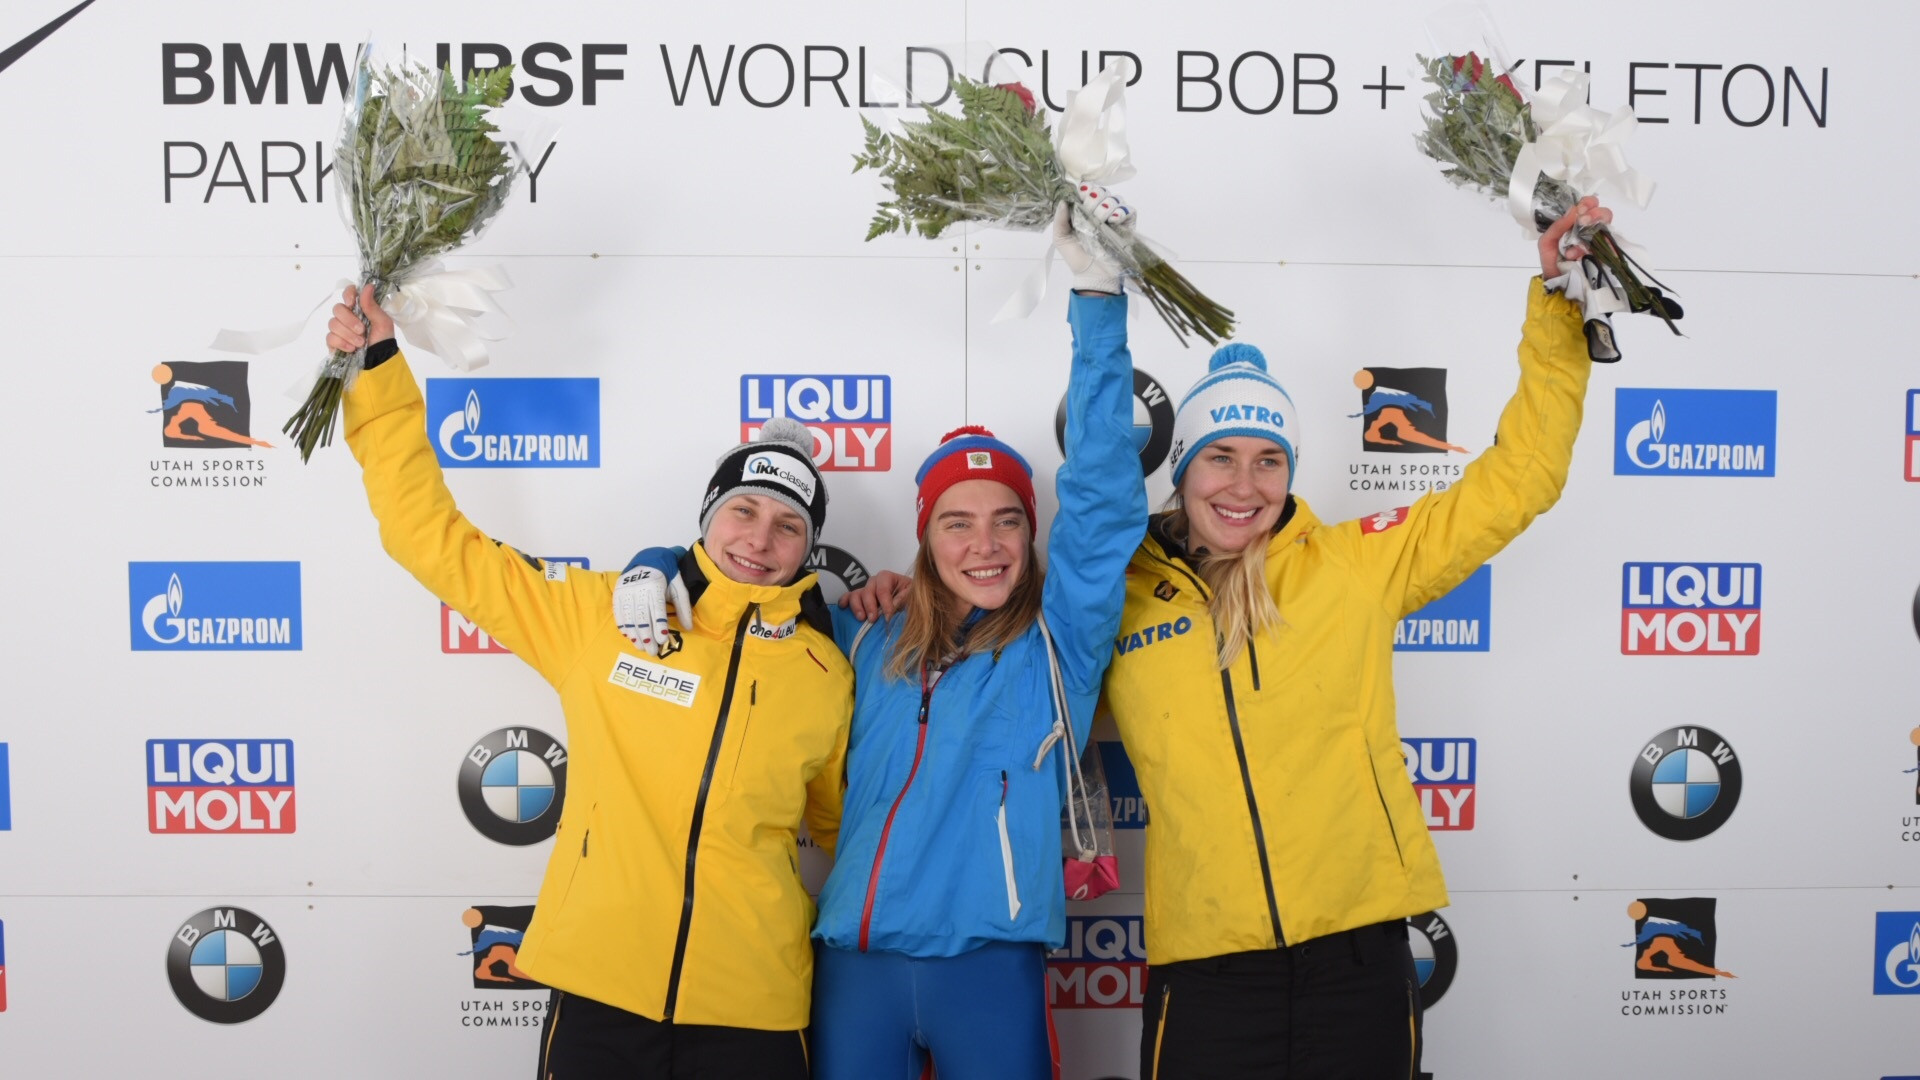 Russia’s Elena Nikitina claimed her first World Cup win since 2013 ©IBSF